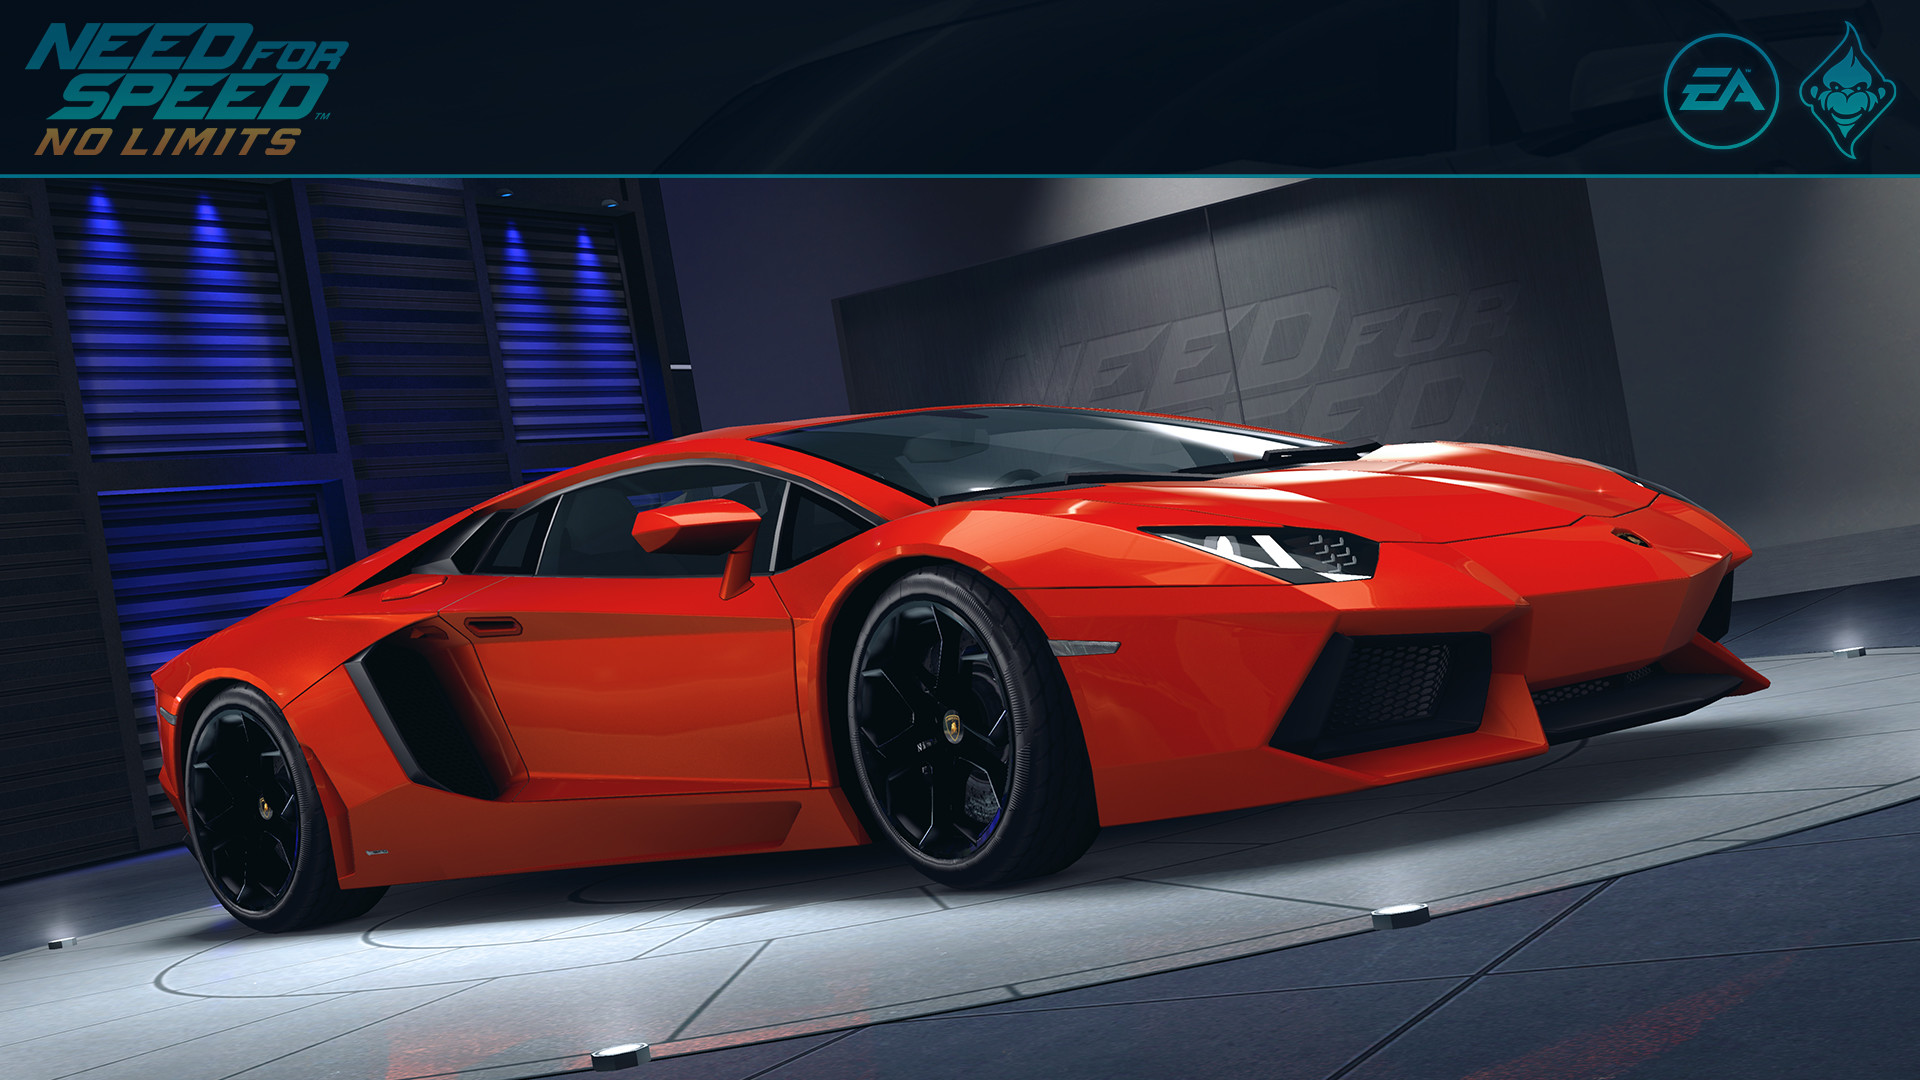 Need For Speed No Limits Video Games Car Vehicle Lamborghini Aventador Need For Speed 1920x1080